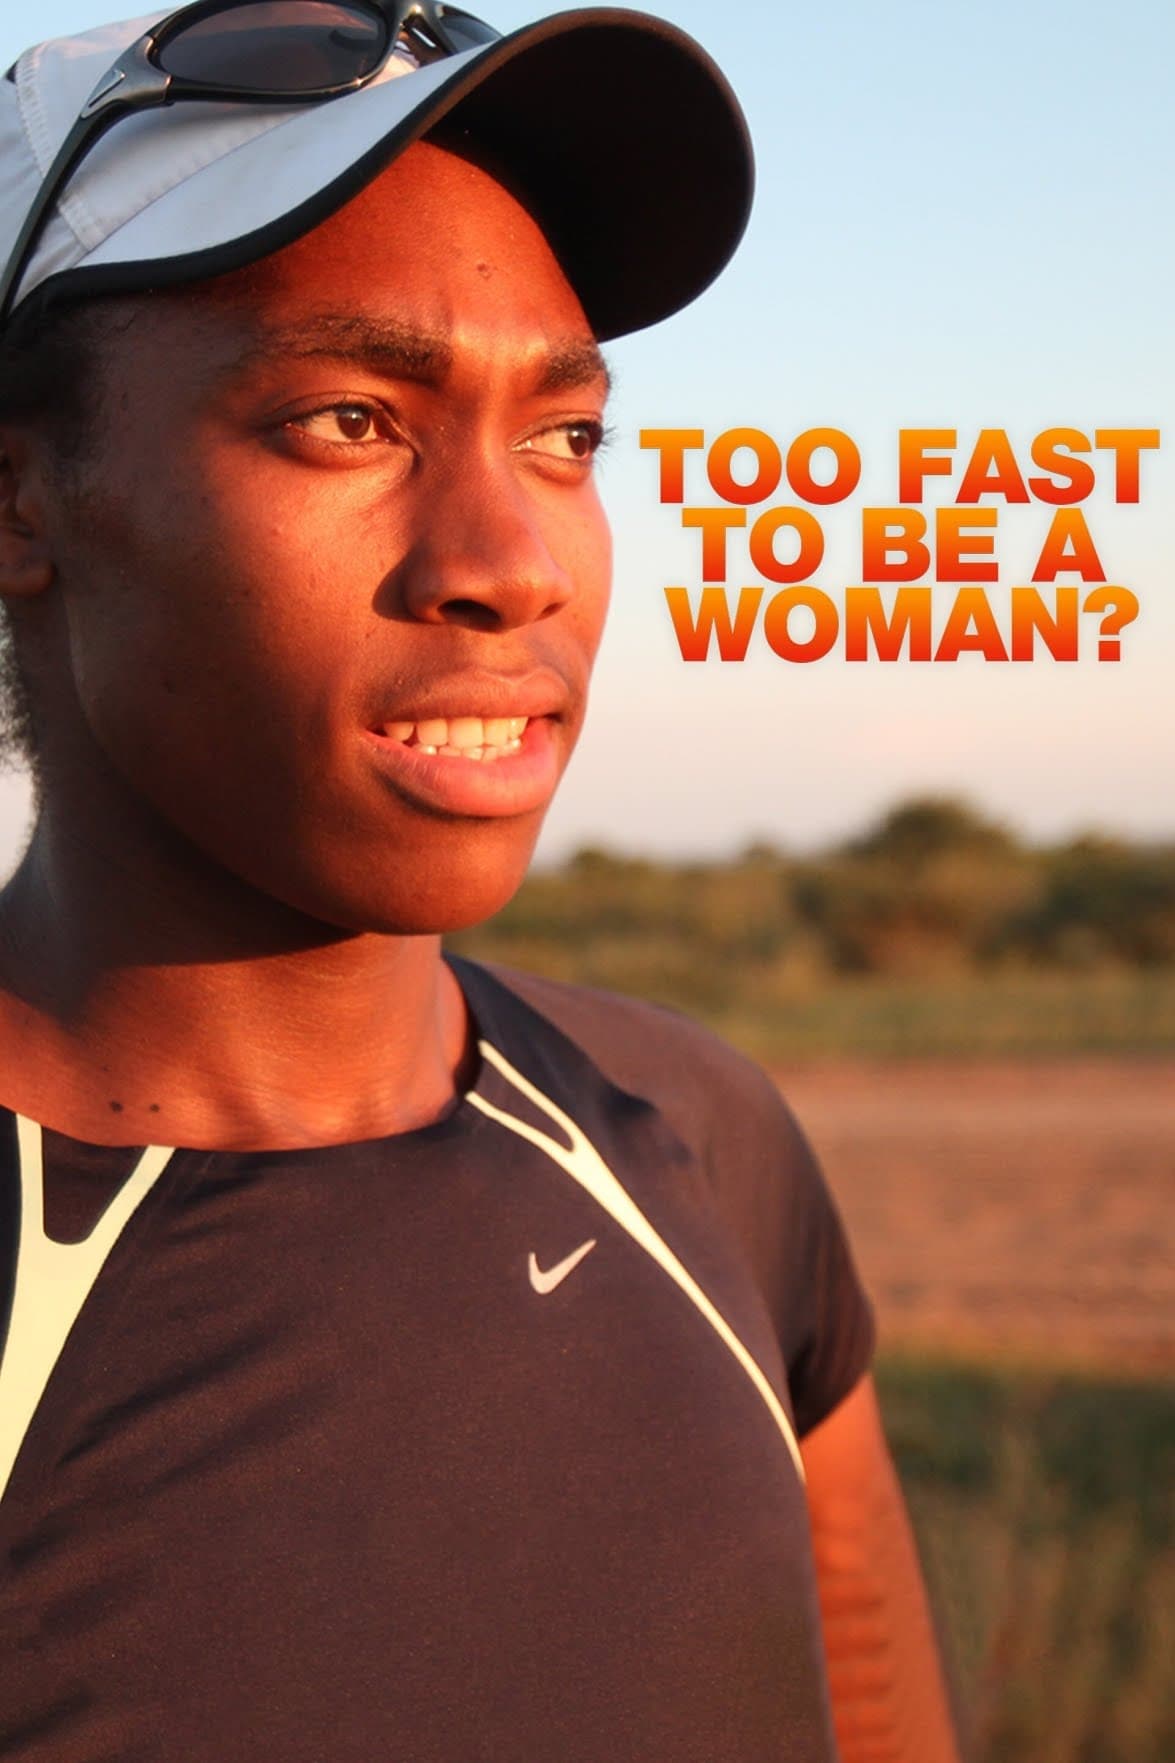 Too Fast to be a Woman?: The Story of Caster Semenya